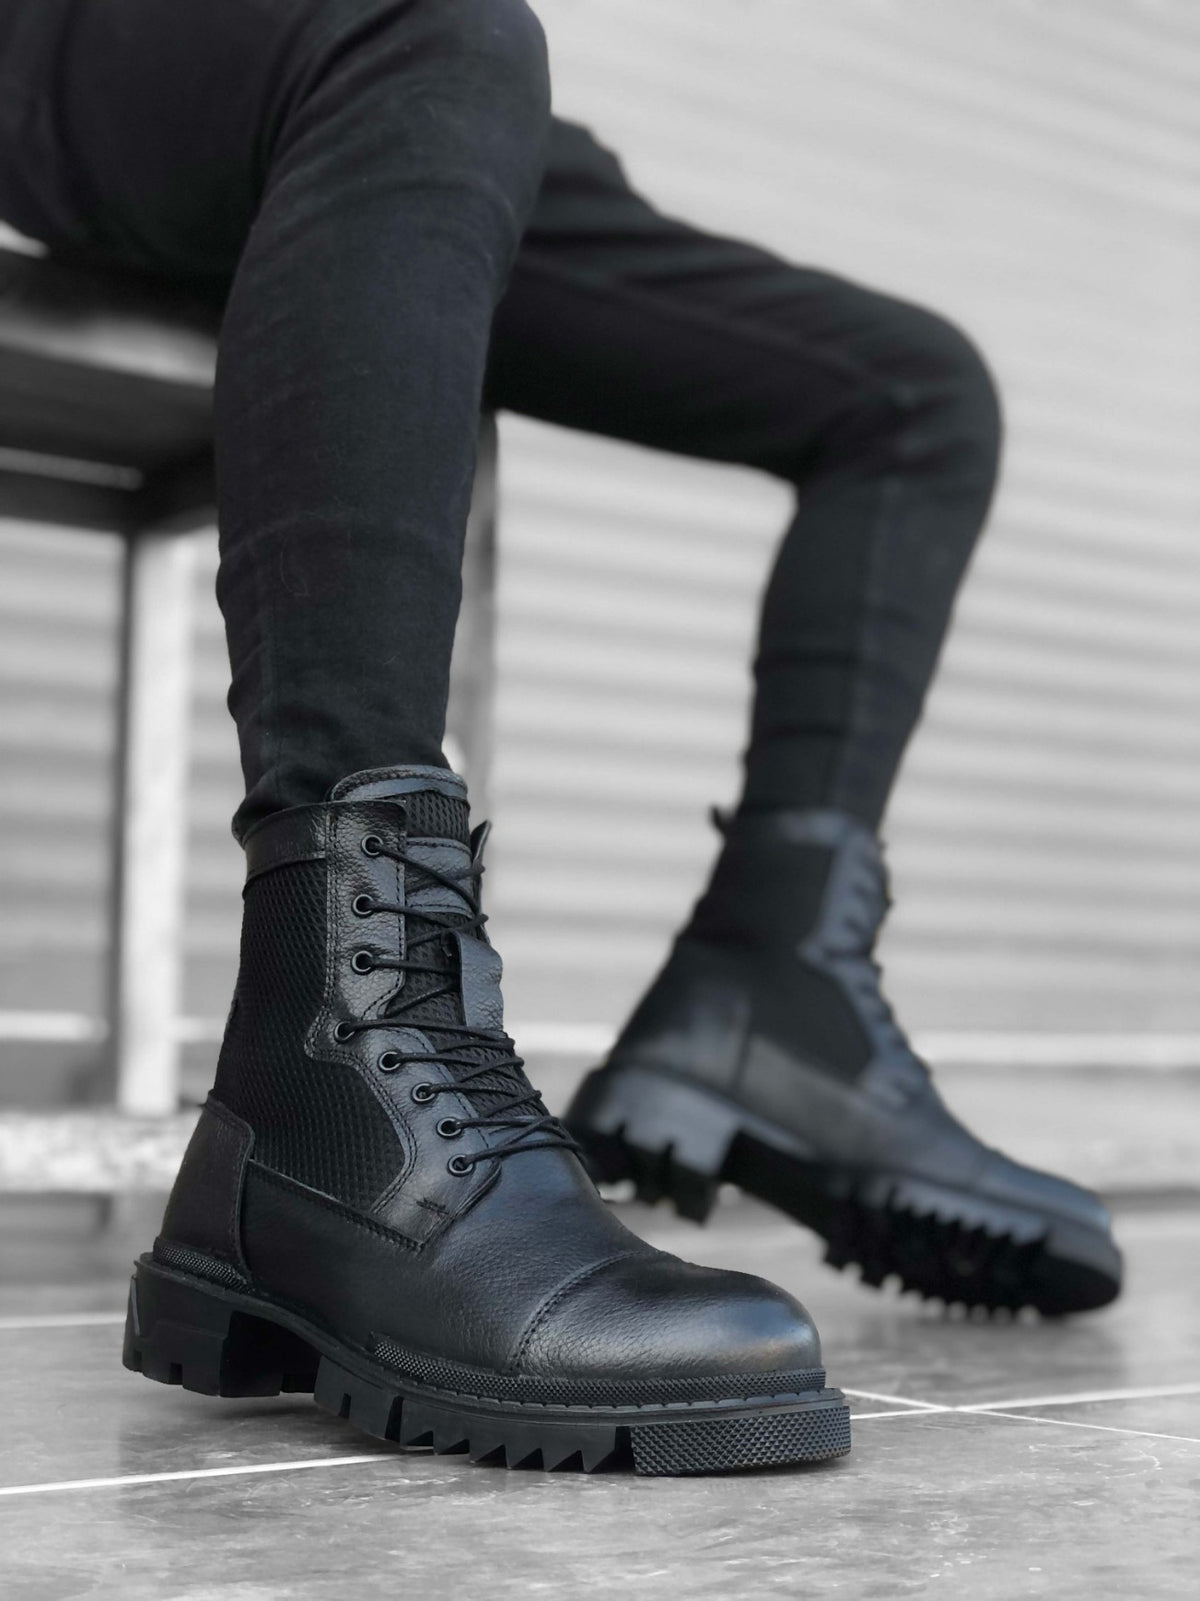 STM Boots BA0183 Genuine Leather Black Men's Boots - STREETMODE™